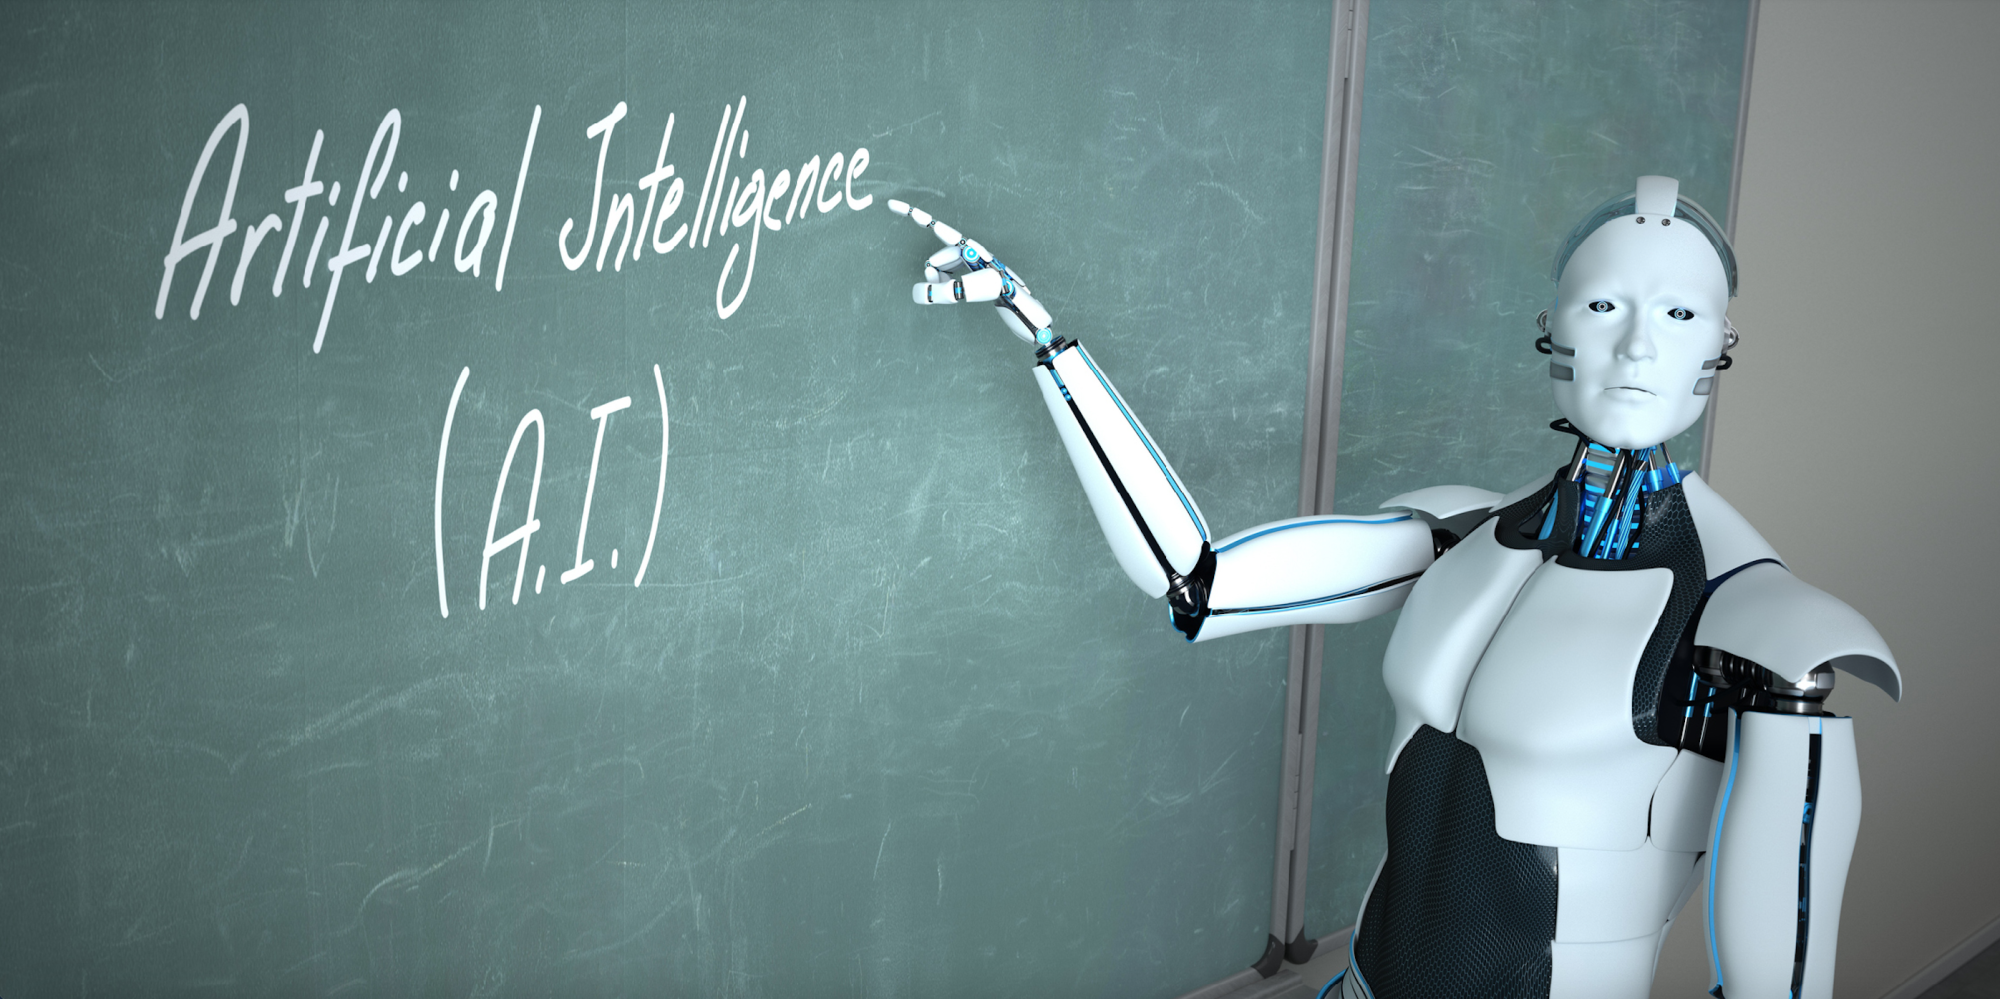 Robot looking at a chalkboard